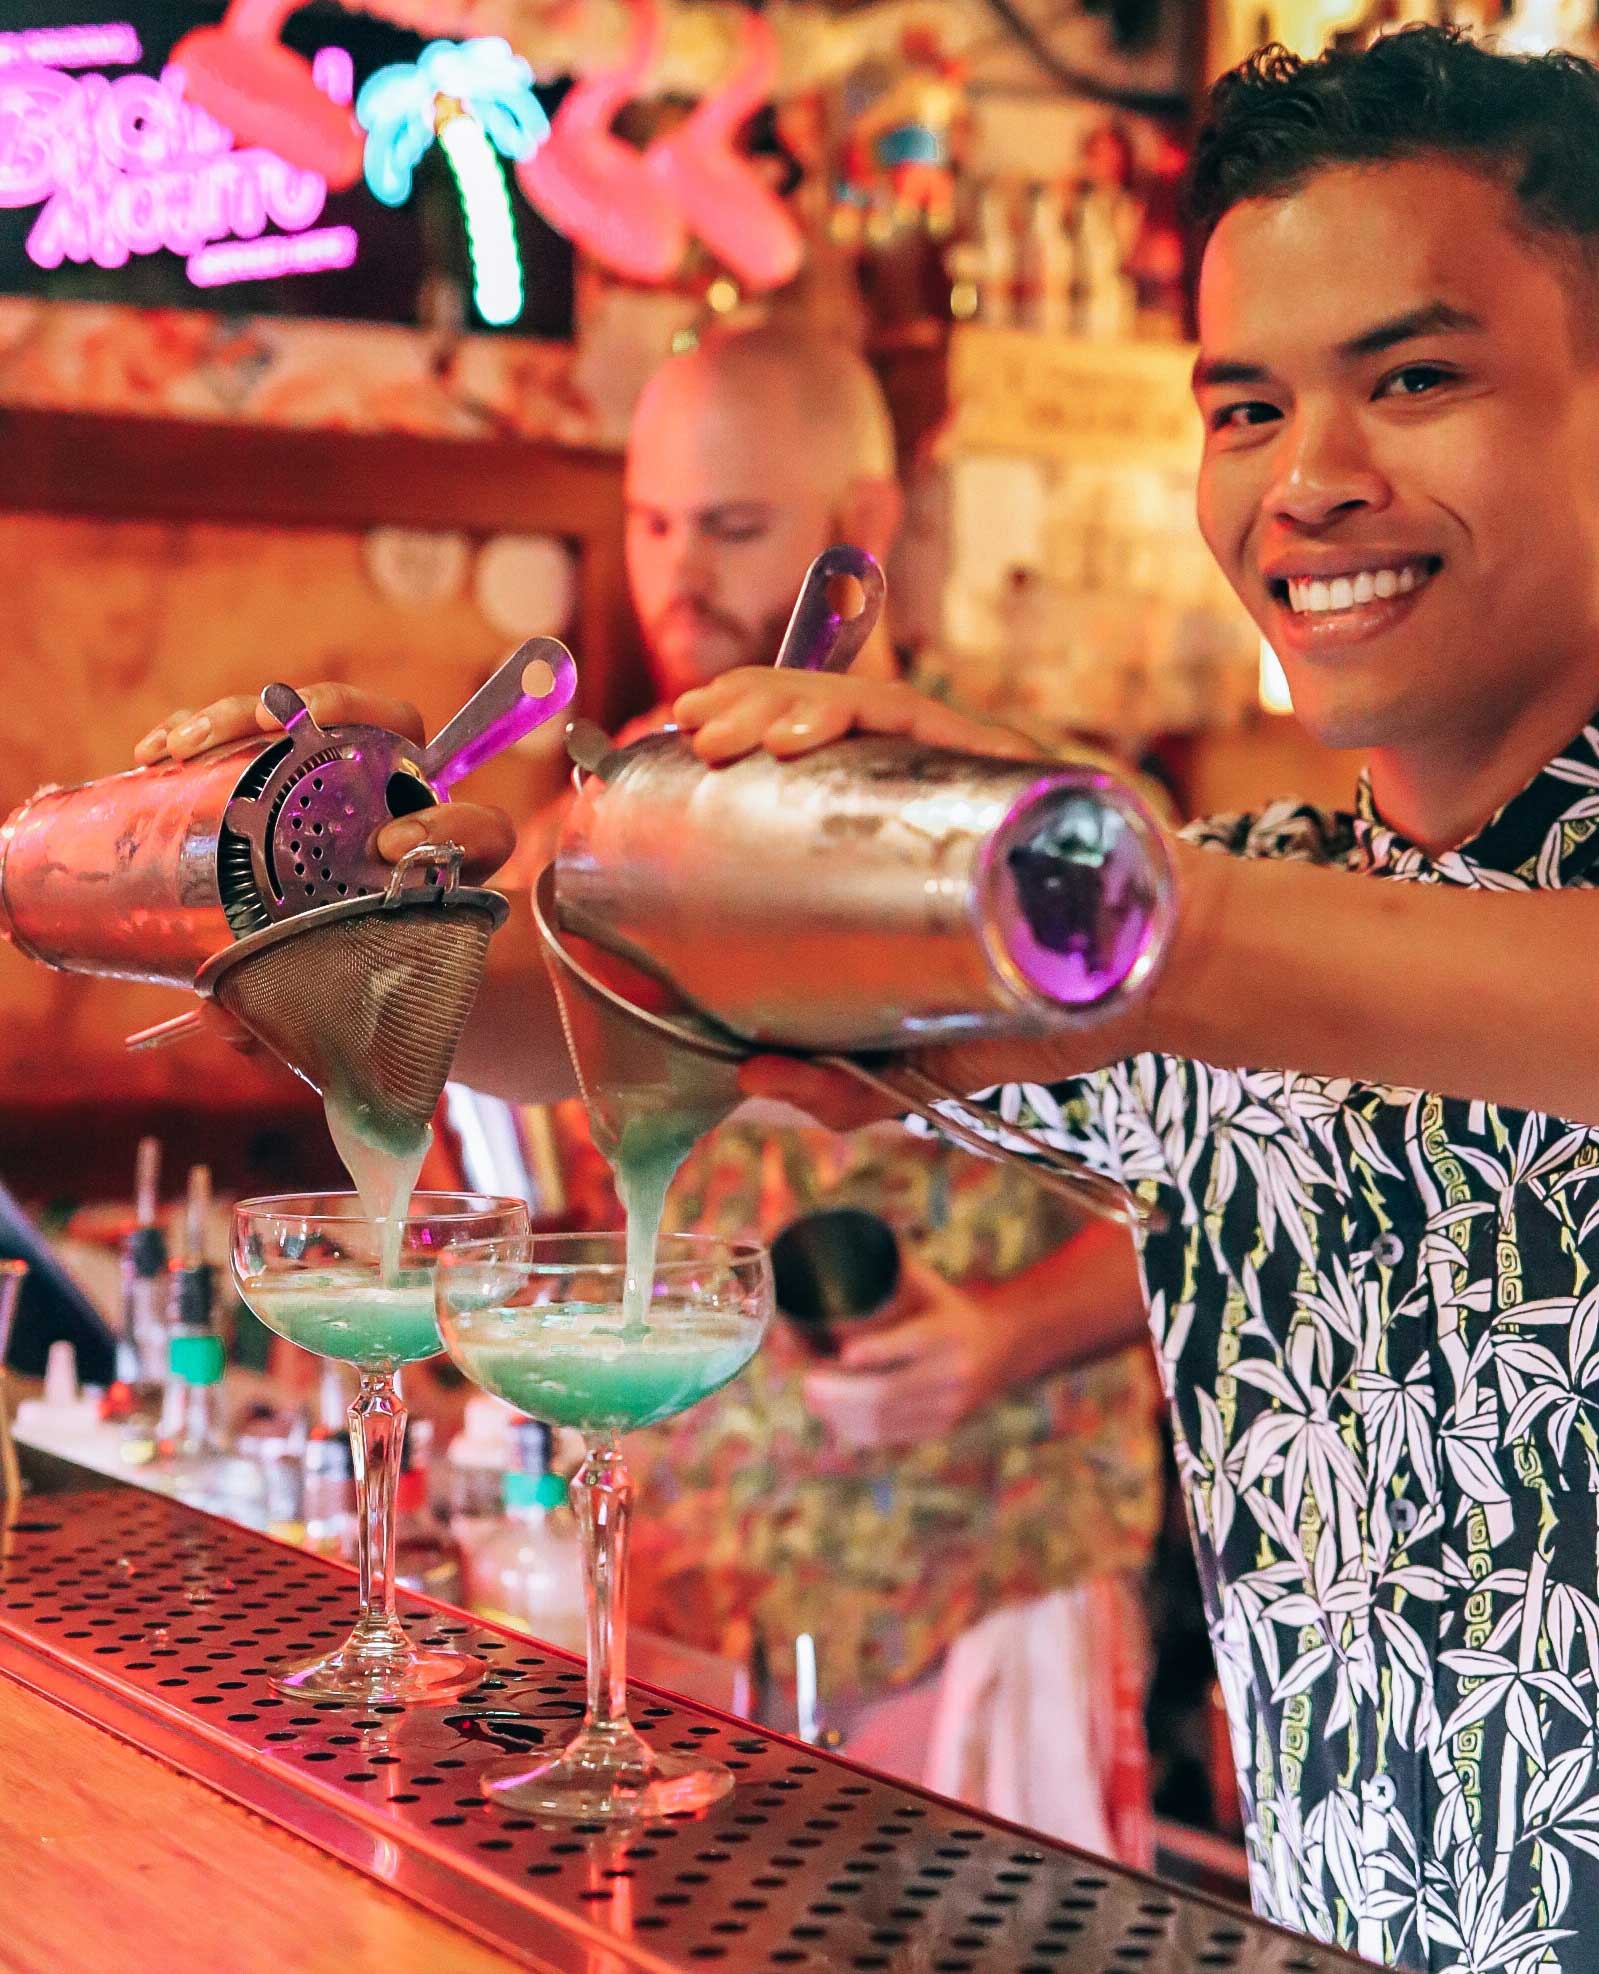 When (three) cocktails collide: a Reviver-fied Miami Vice and more at Flamingos Tiki Bar